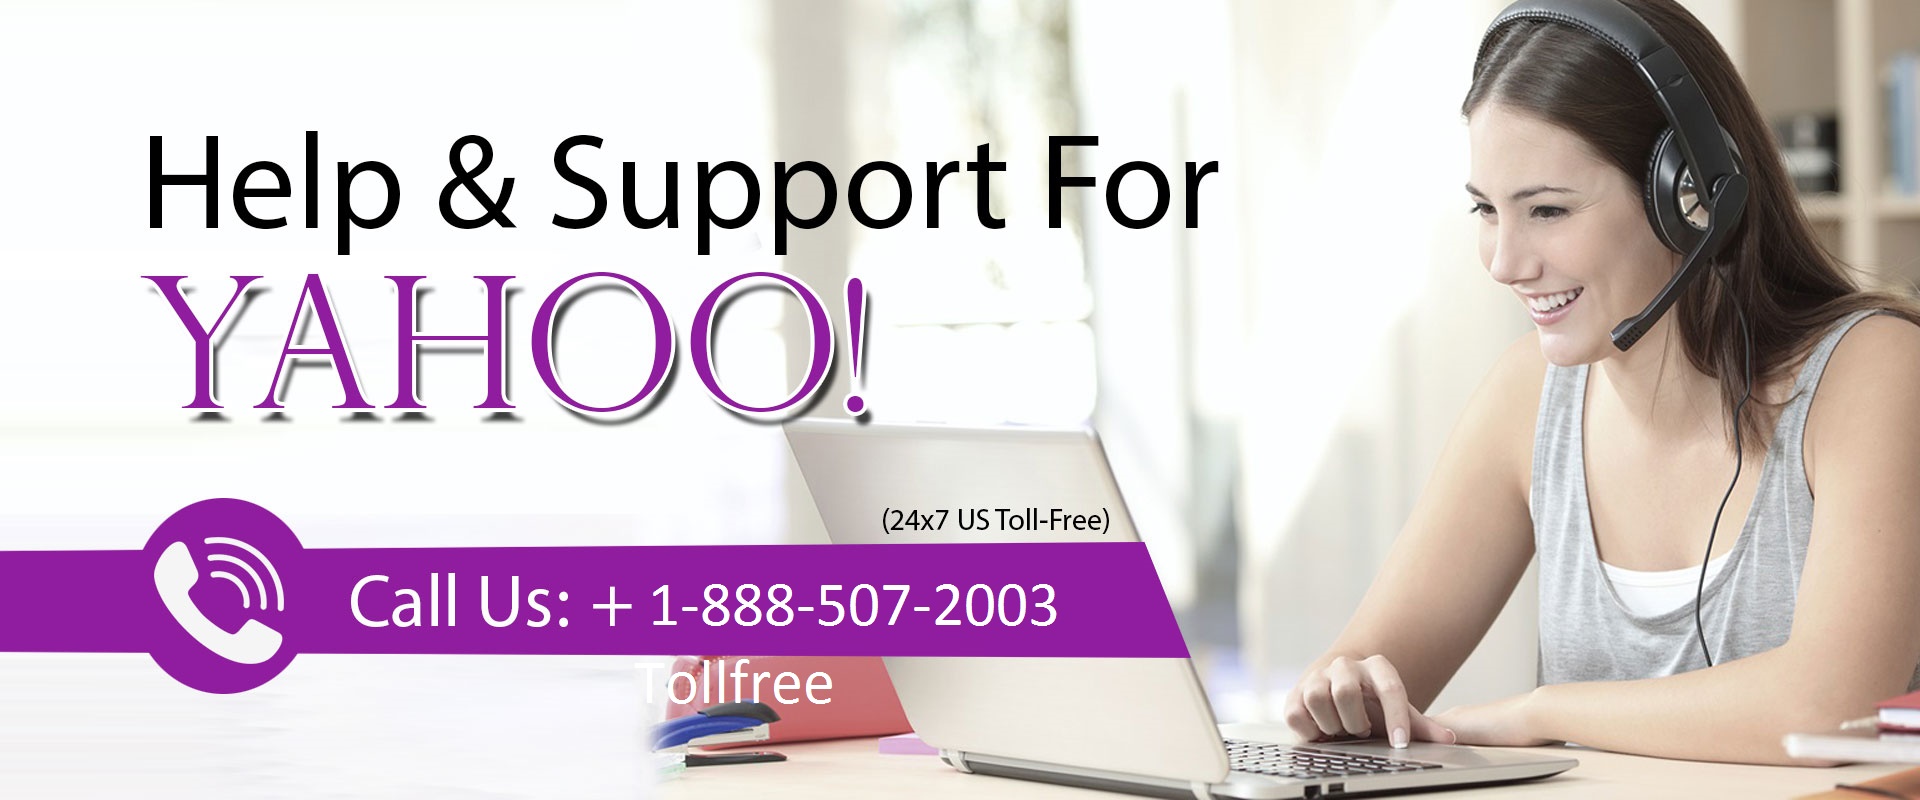 Yahoo Phone Support Numbers